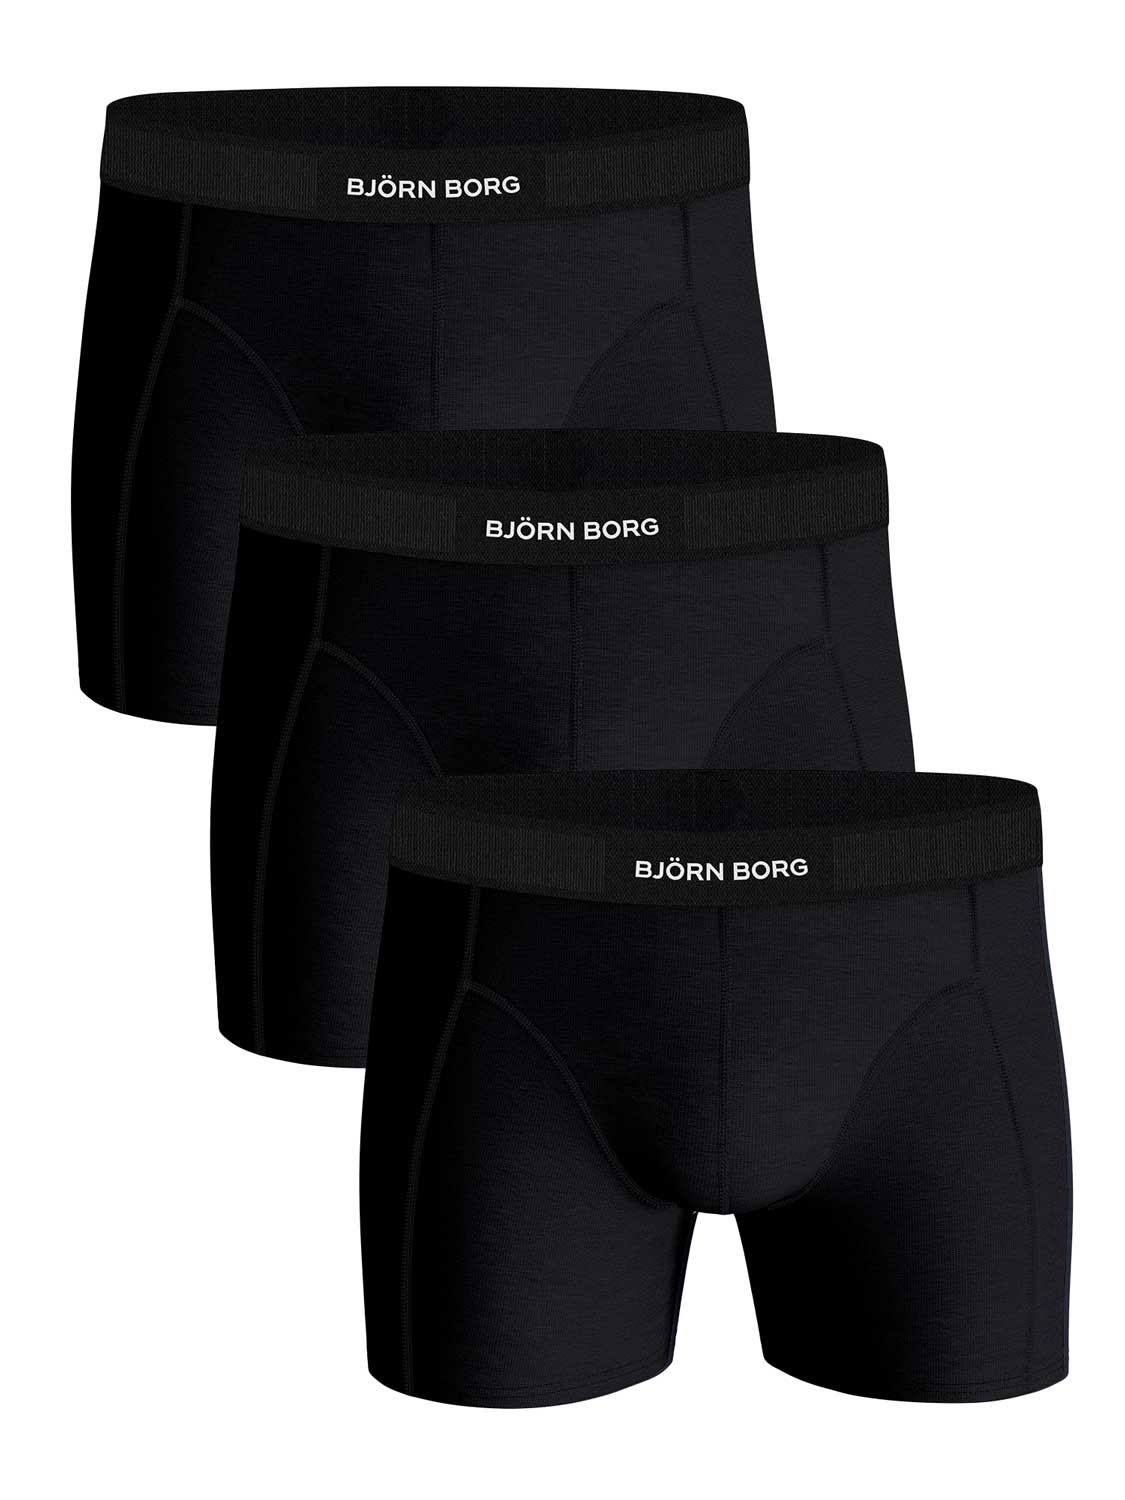 Björn Borg Cotton Stretch boxers - heren boxers normale lengte (3-pack) - multicolor - Maat: XXL